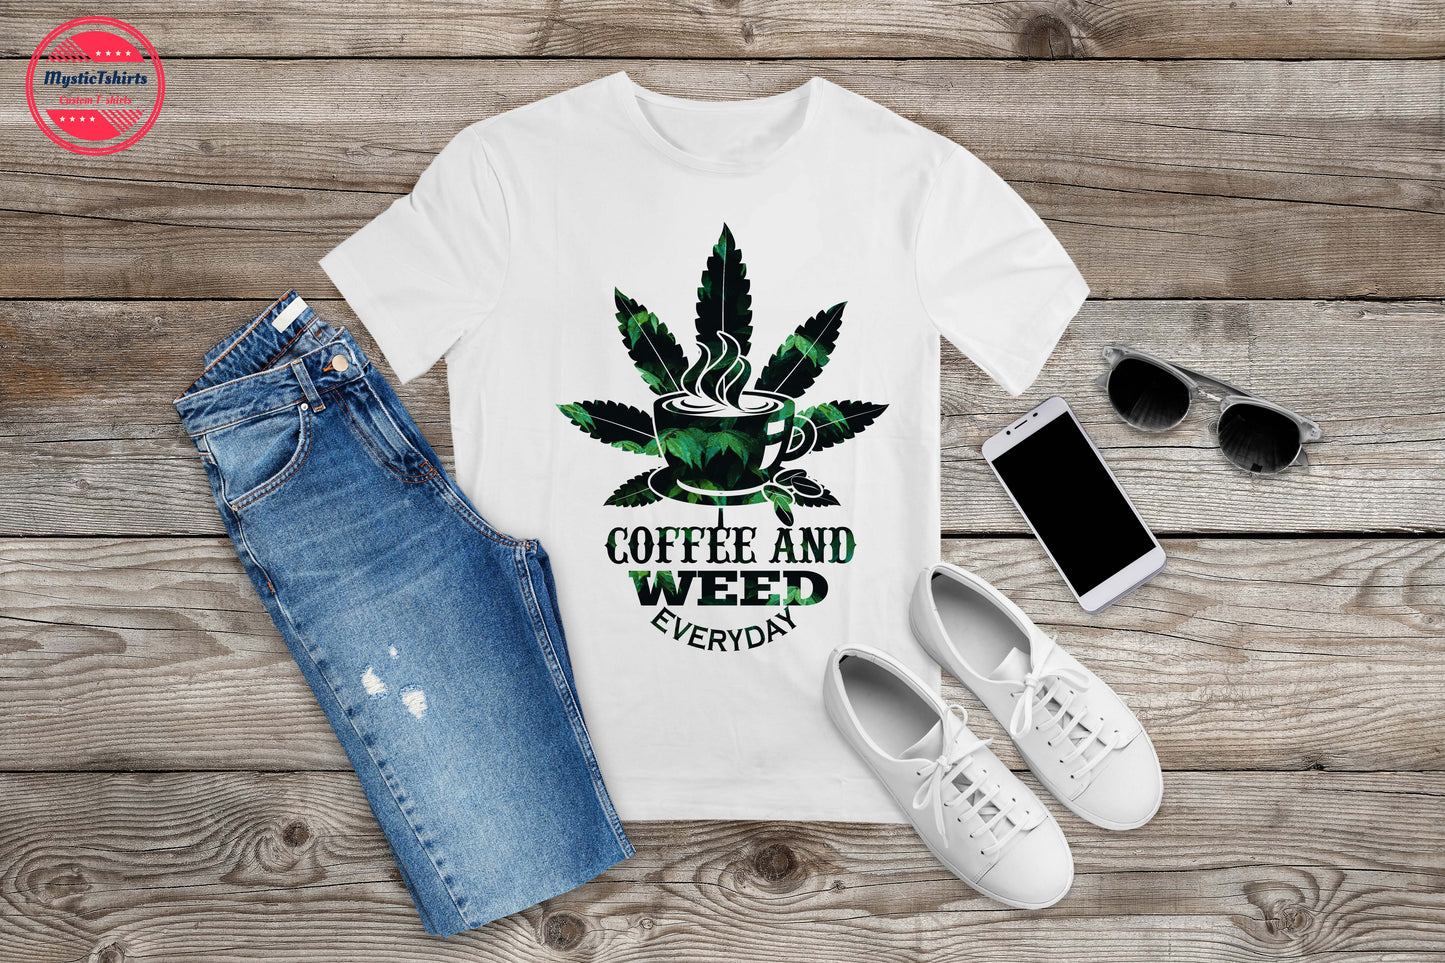 058. Coffee and Weed Every Day, Custom Made Shirt, Personalized T-Shirt, Custom Text, Make Your Own Shirt, Custom Tee